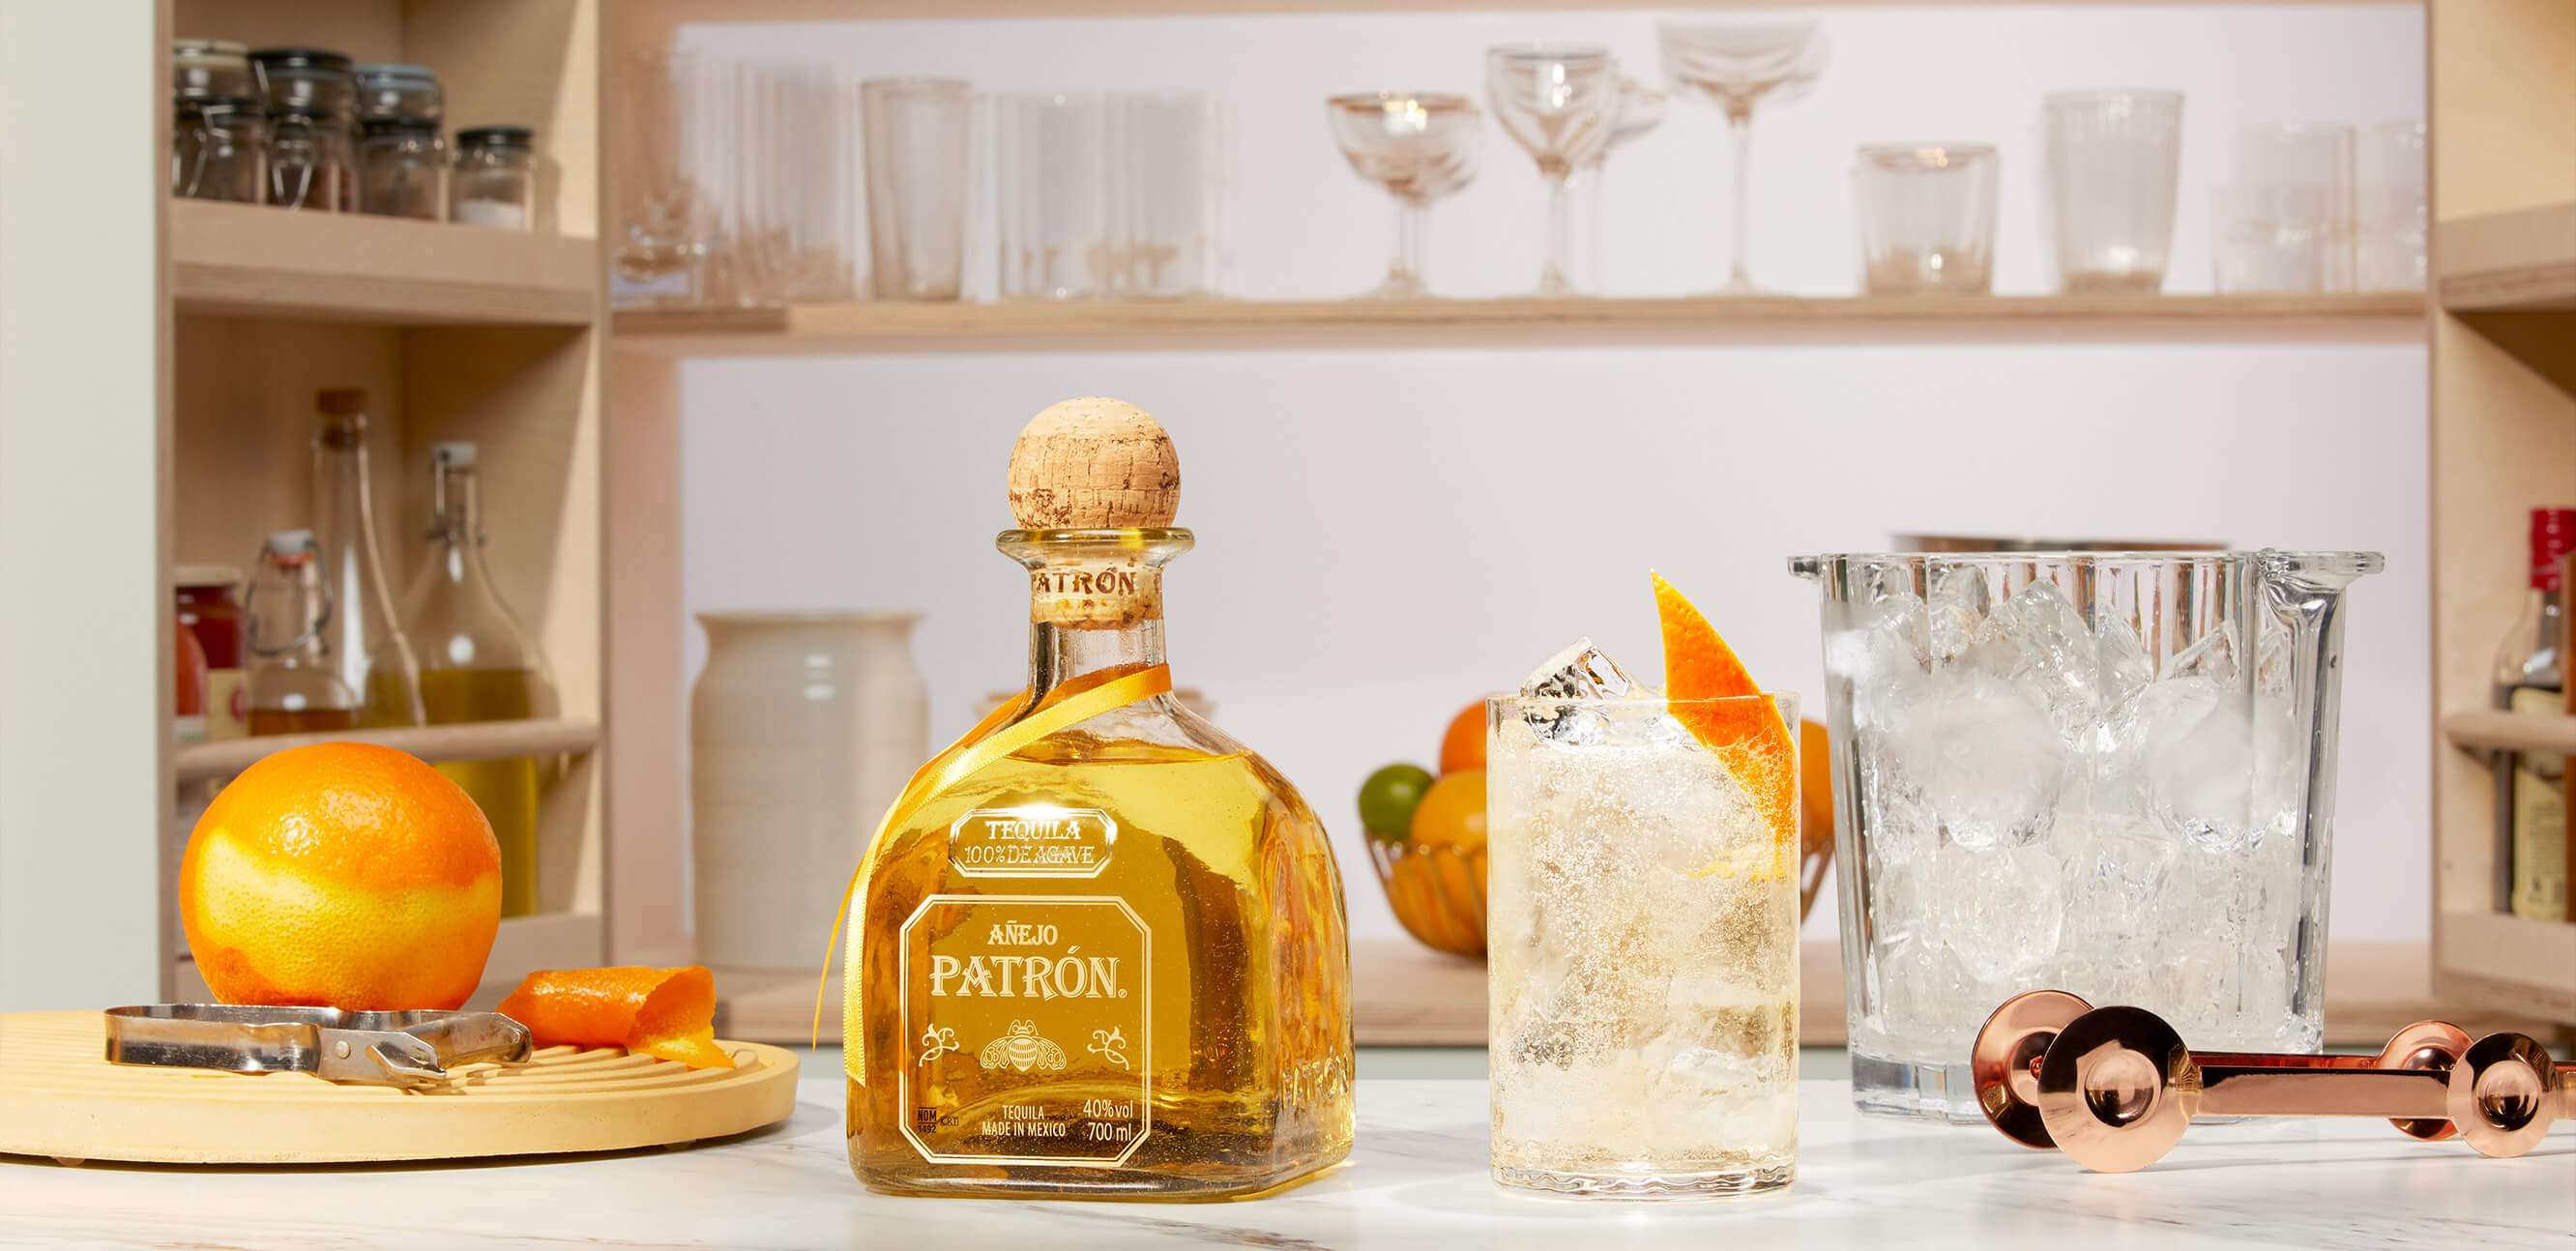 Occasions for Personalized Bar Gifts, A Guide From Spirits On Ice